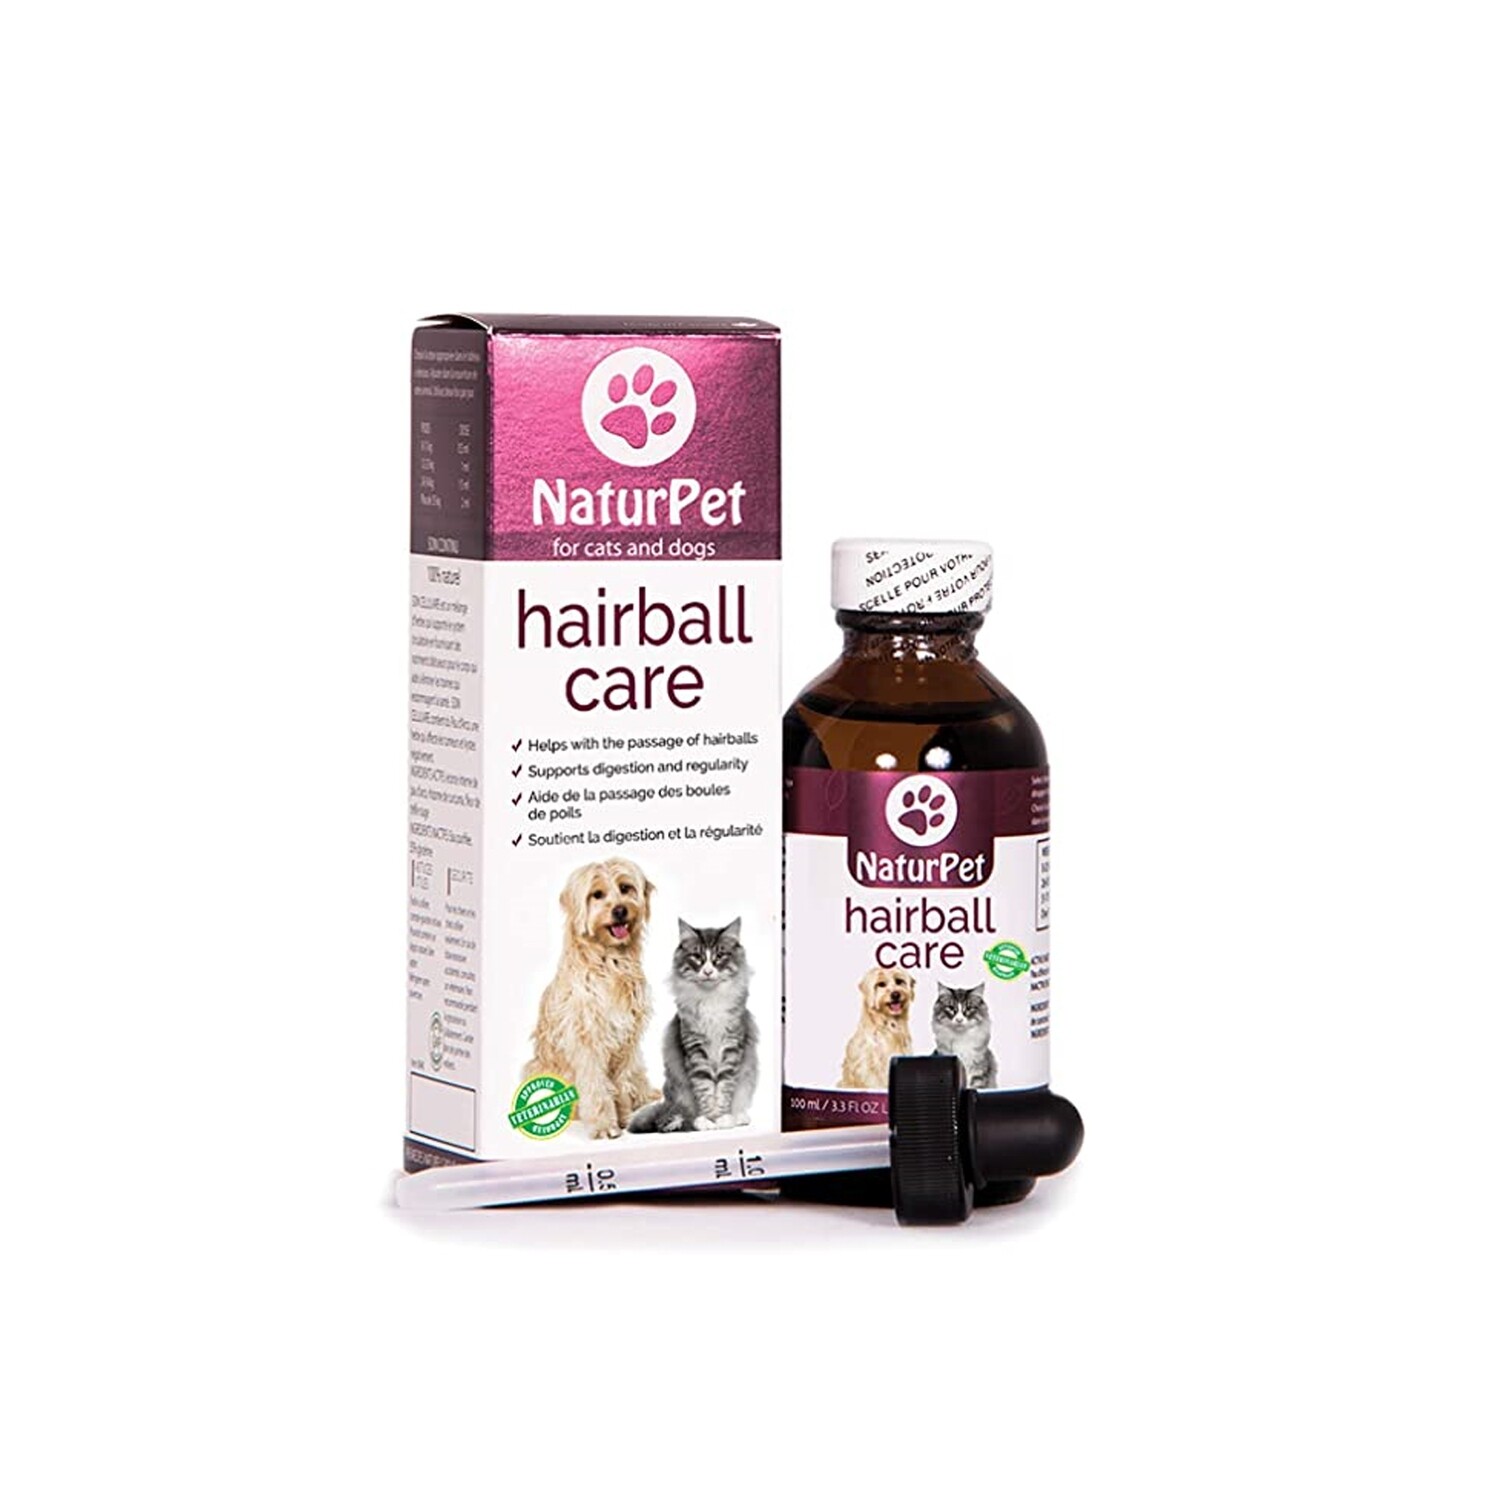 NATURPET Hairball Care for cats and dogs -  毛球护理 天然化毛助消化